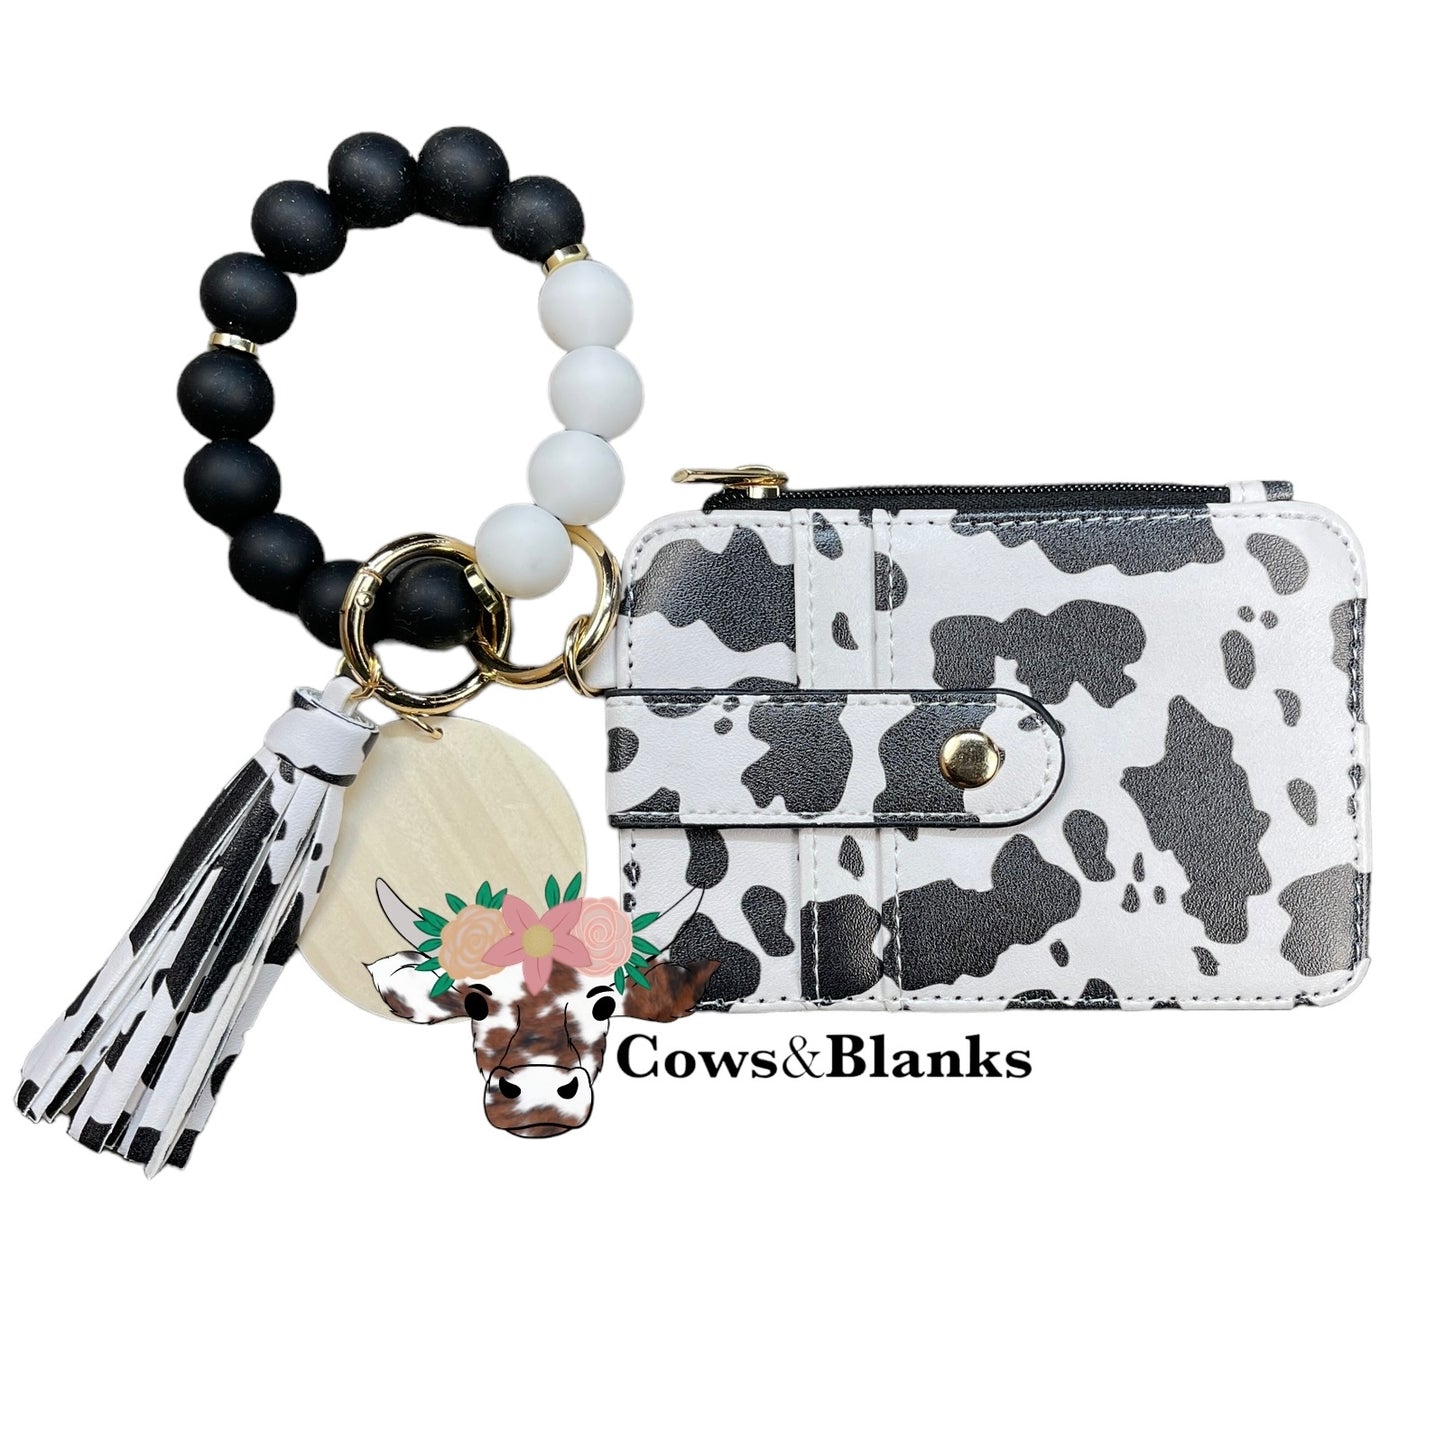 Wallet/Wristlet with Black and White Cow Print Cardholder with a Black and White Silicone Beaded Wristlet with Gold Hardware, Matching Tassel, and a Wooden Disc